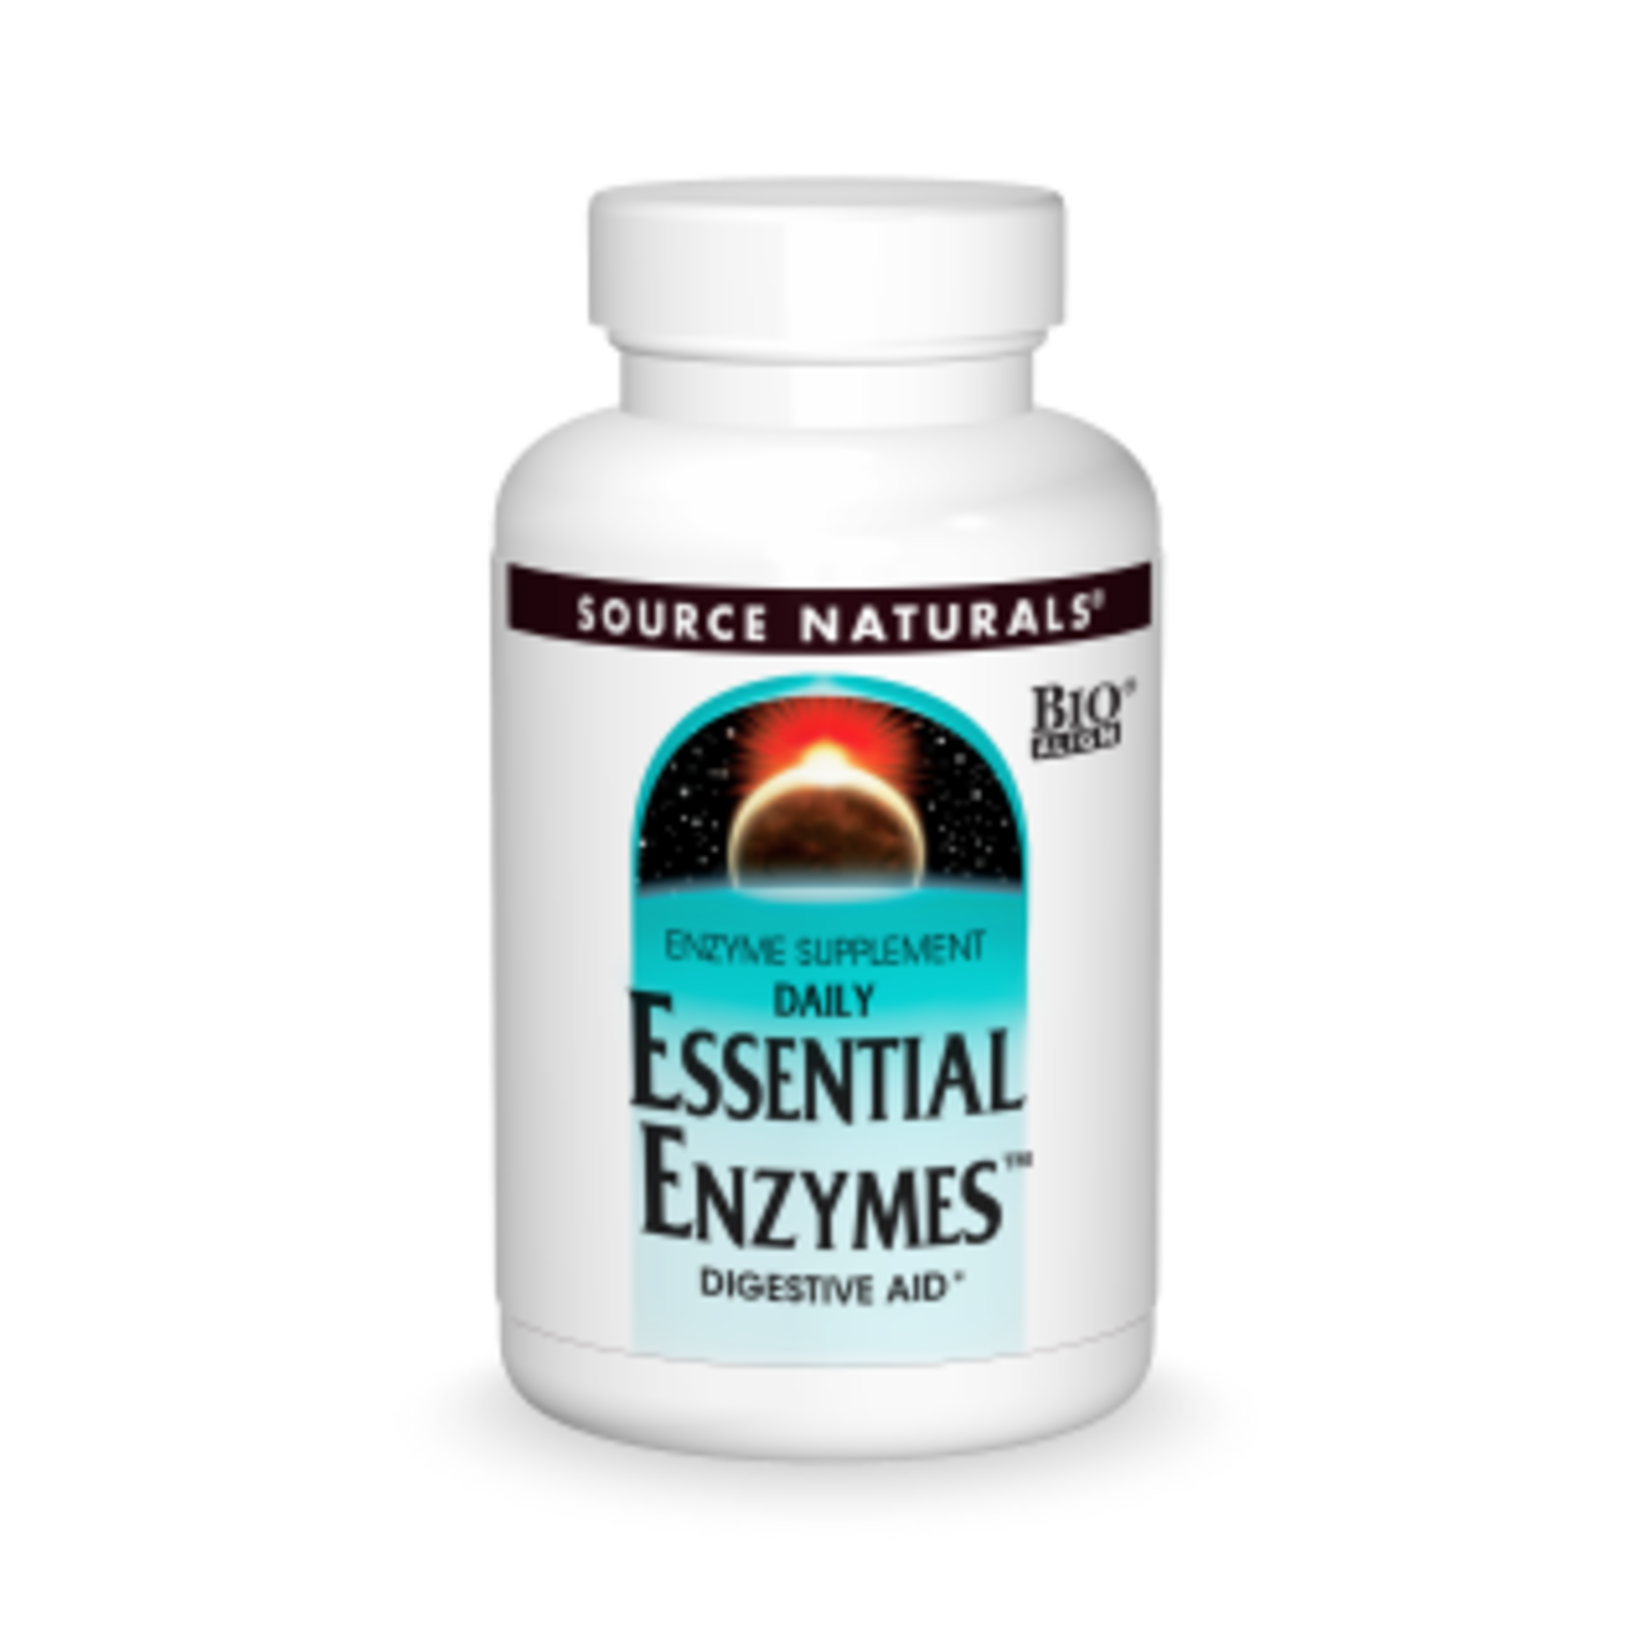 Source Naturals Source Naturals - Essential Enzymes 500mg - 240 Capsules